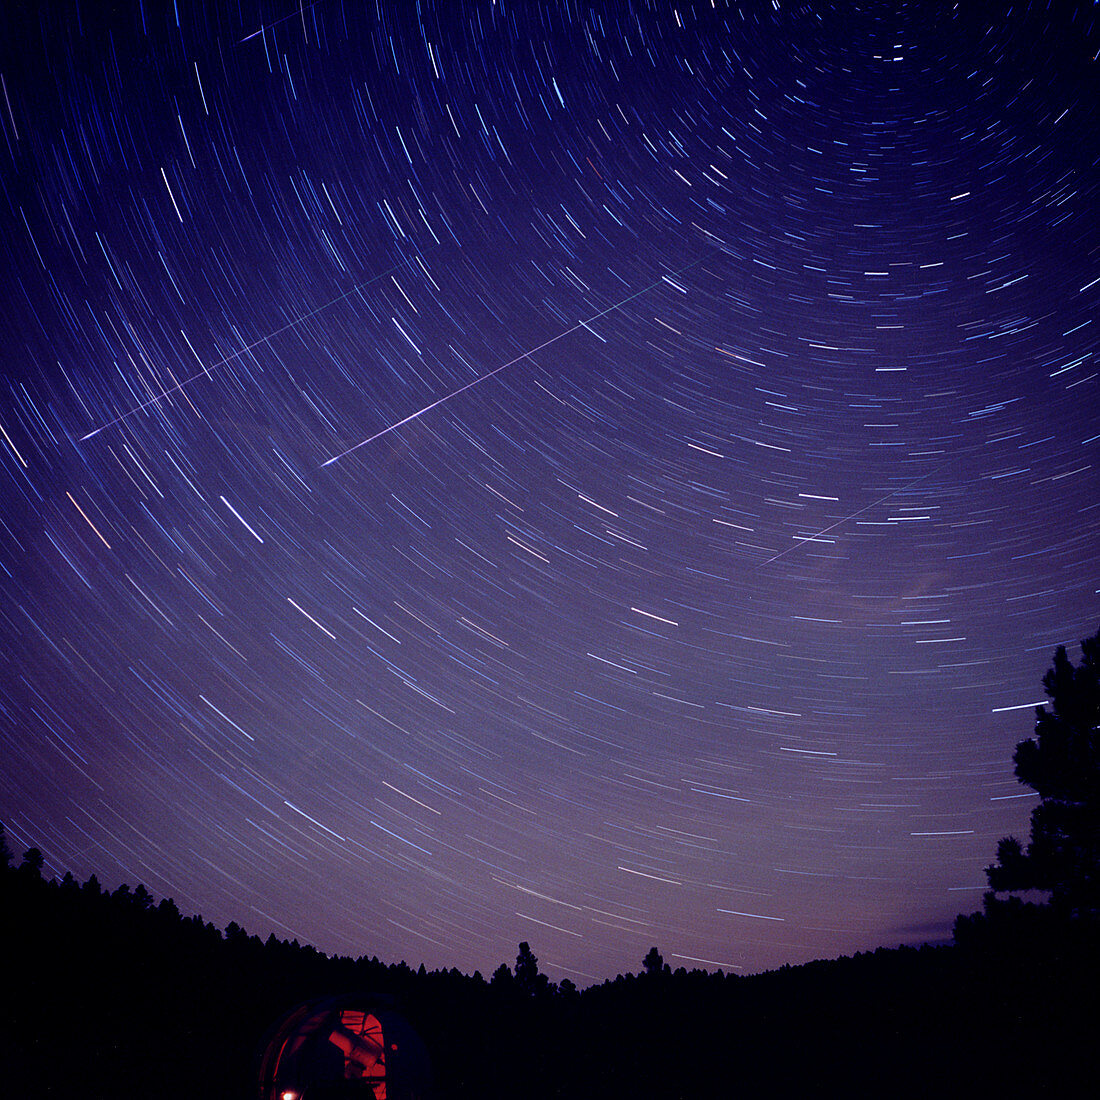 Startrails with Leonids meteors